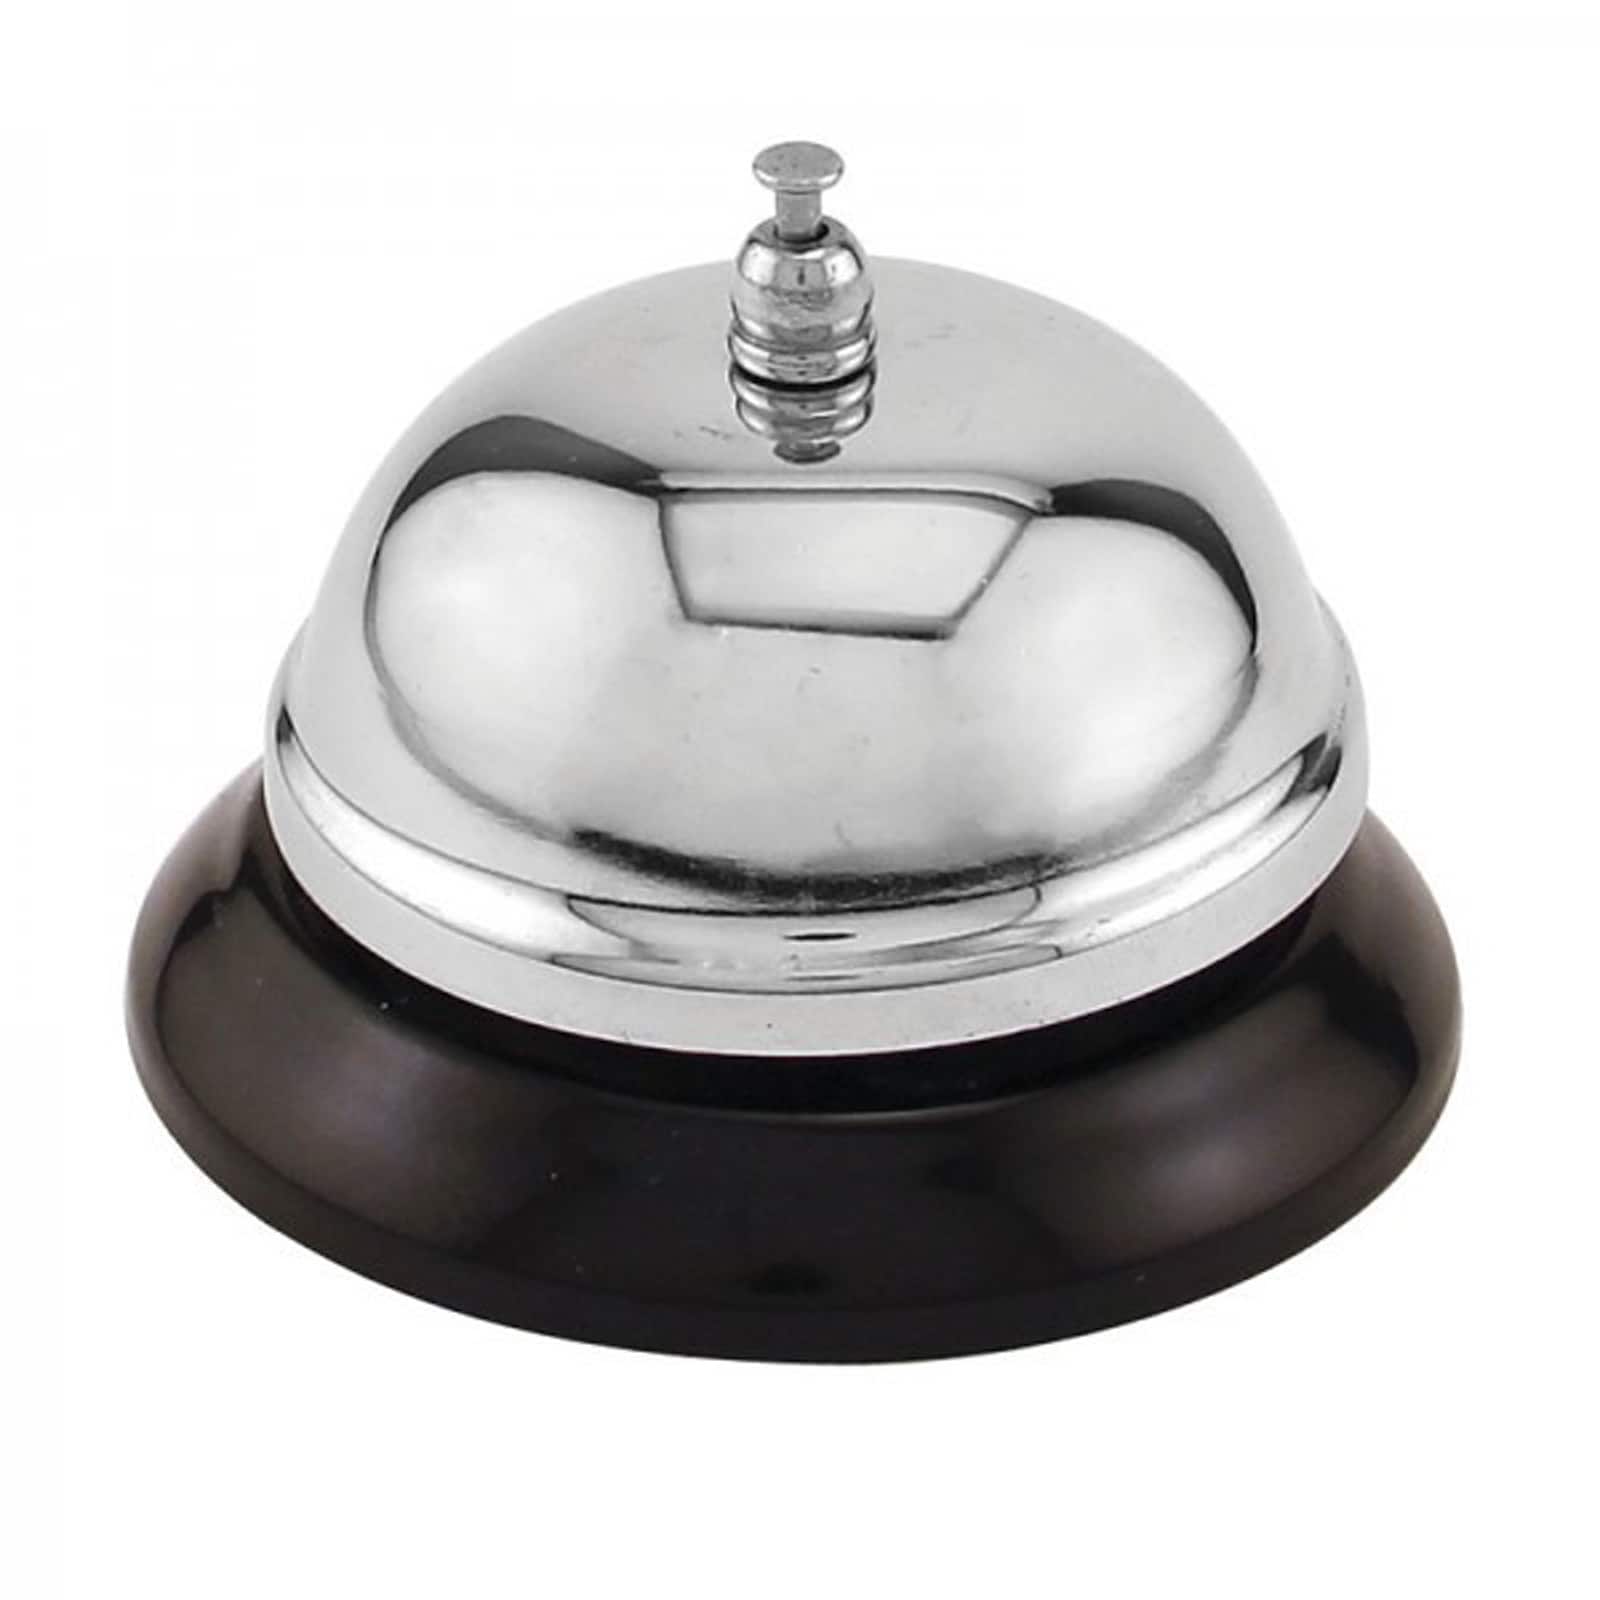 Get the Hygloss Call Bell, Set of 6 at Michaels